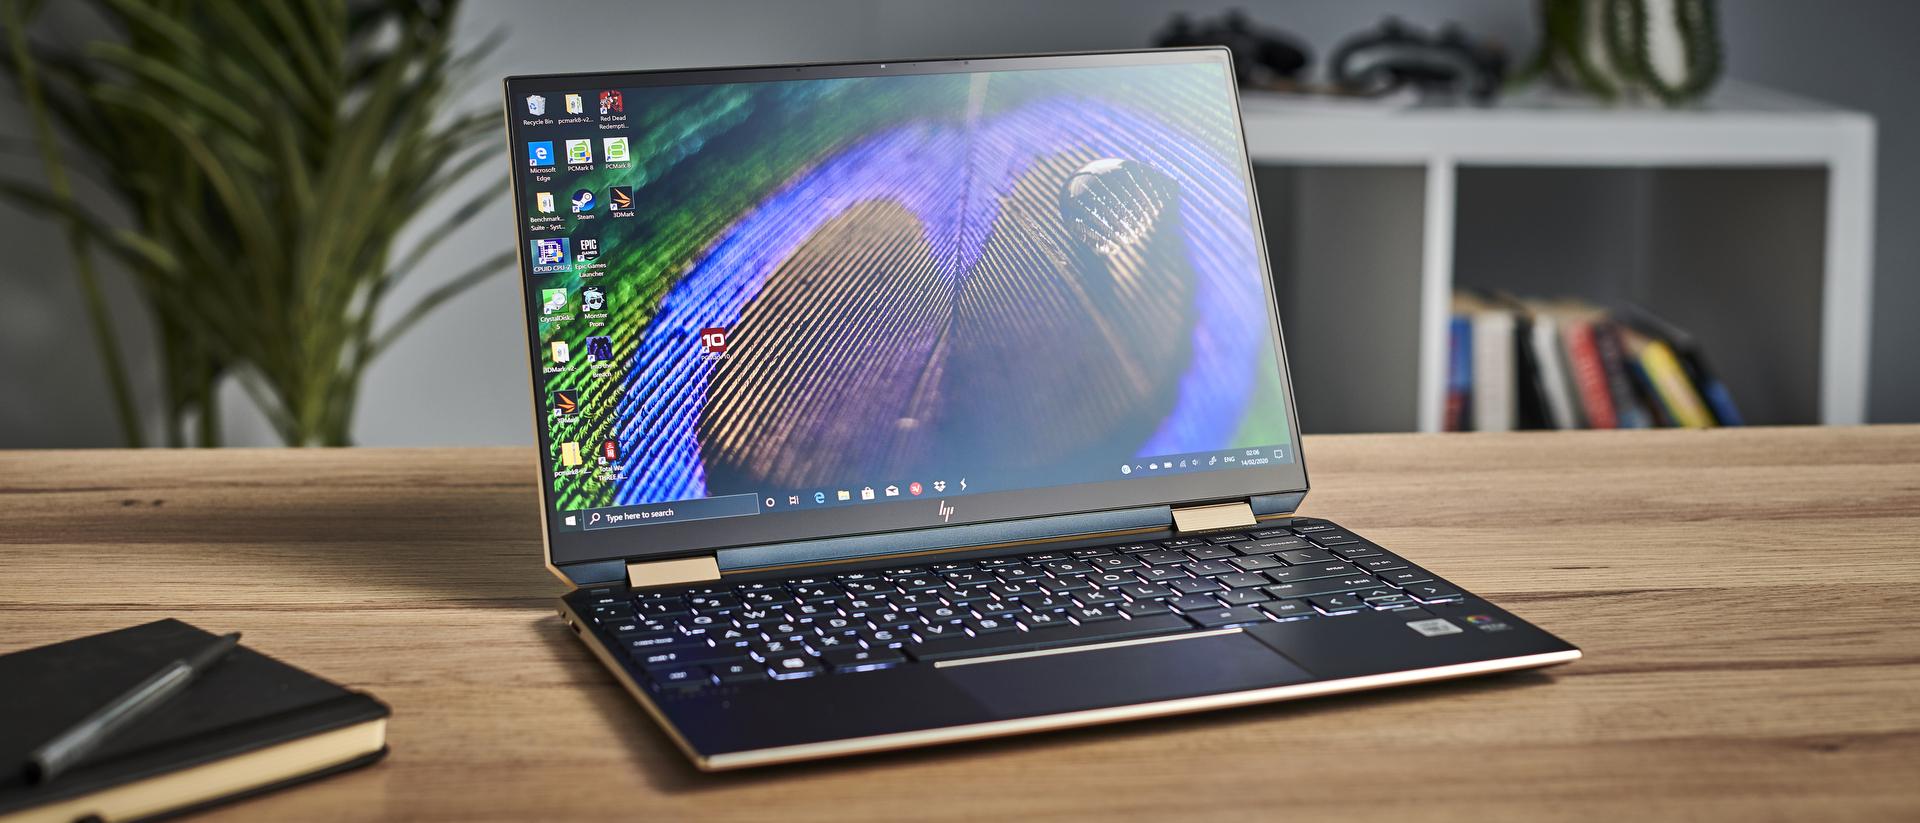 HP Spectre x360 14 2-in-1 Reviews, Pros and Cons